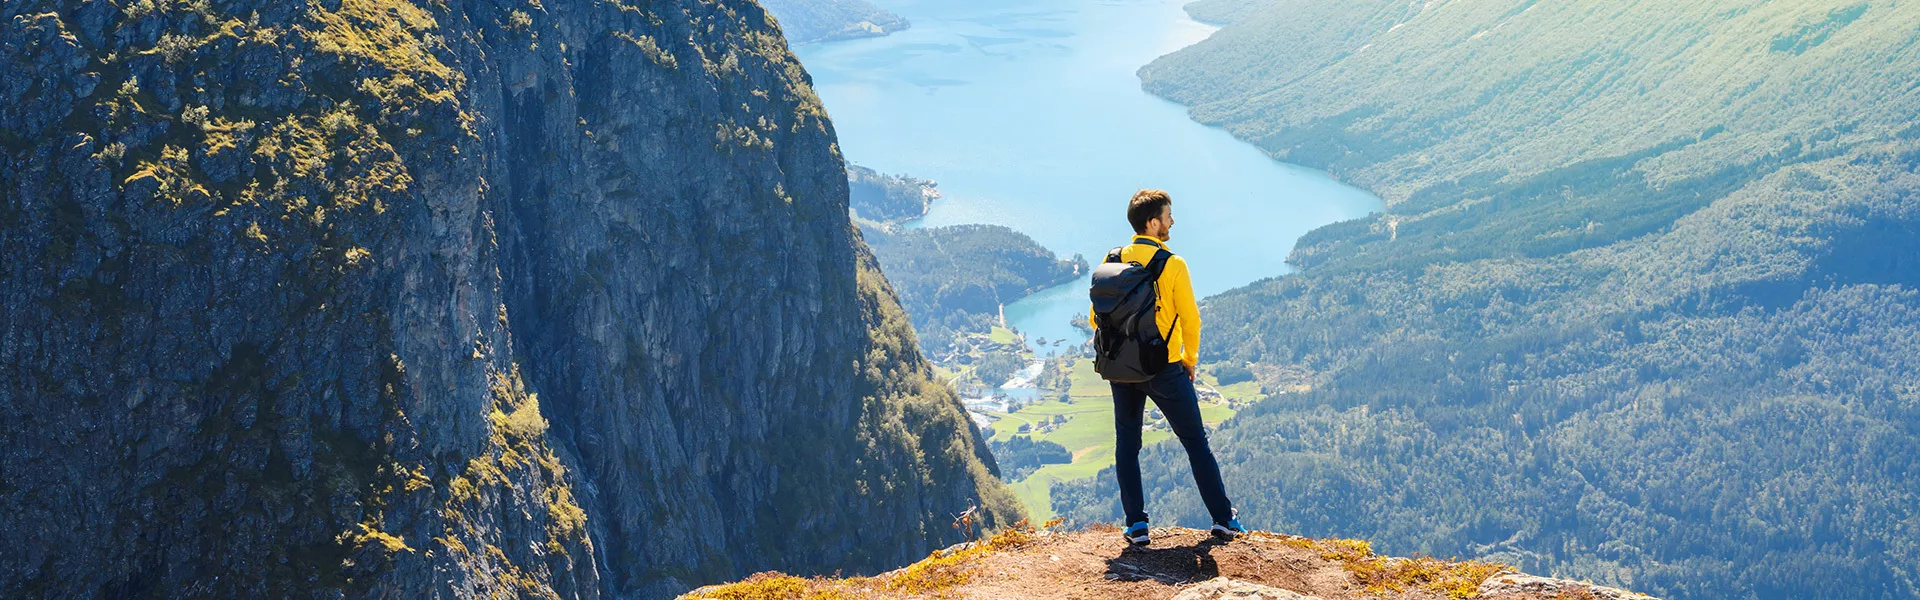 Tourist admiring the view from the top of Loen, Norway